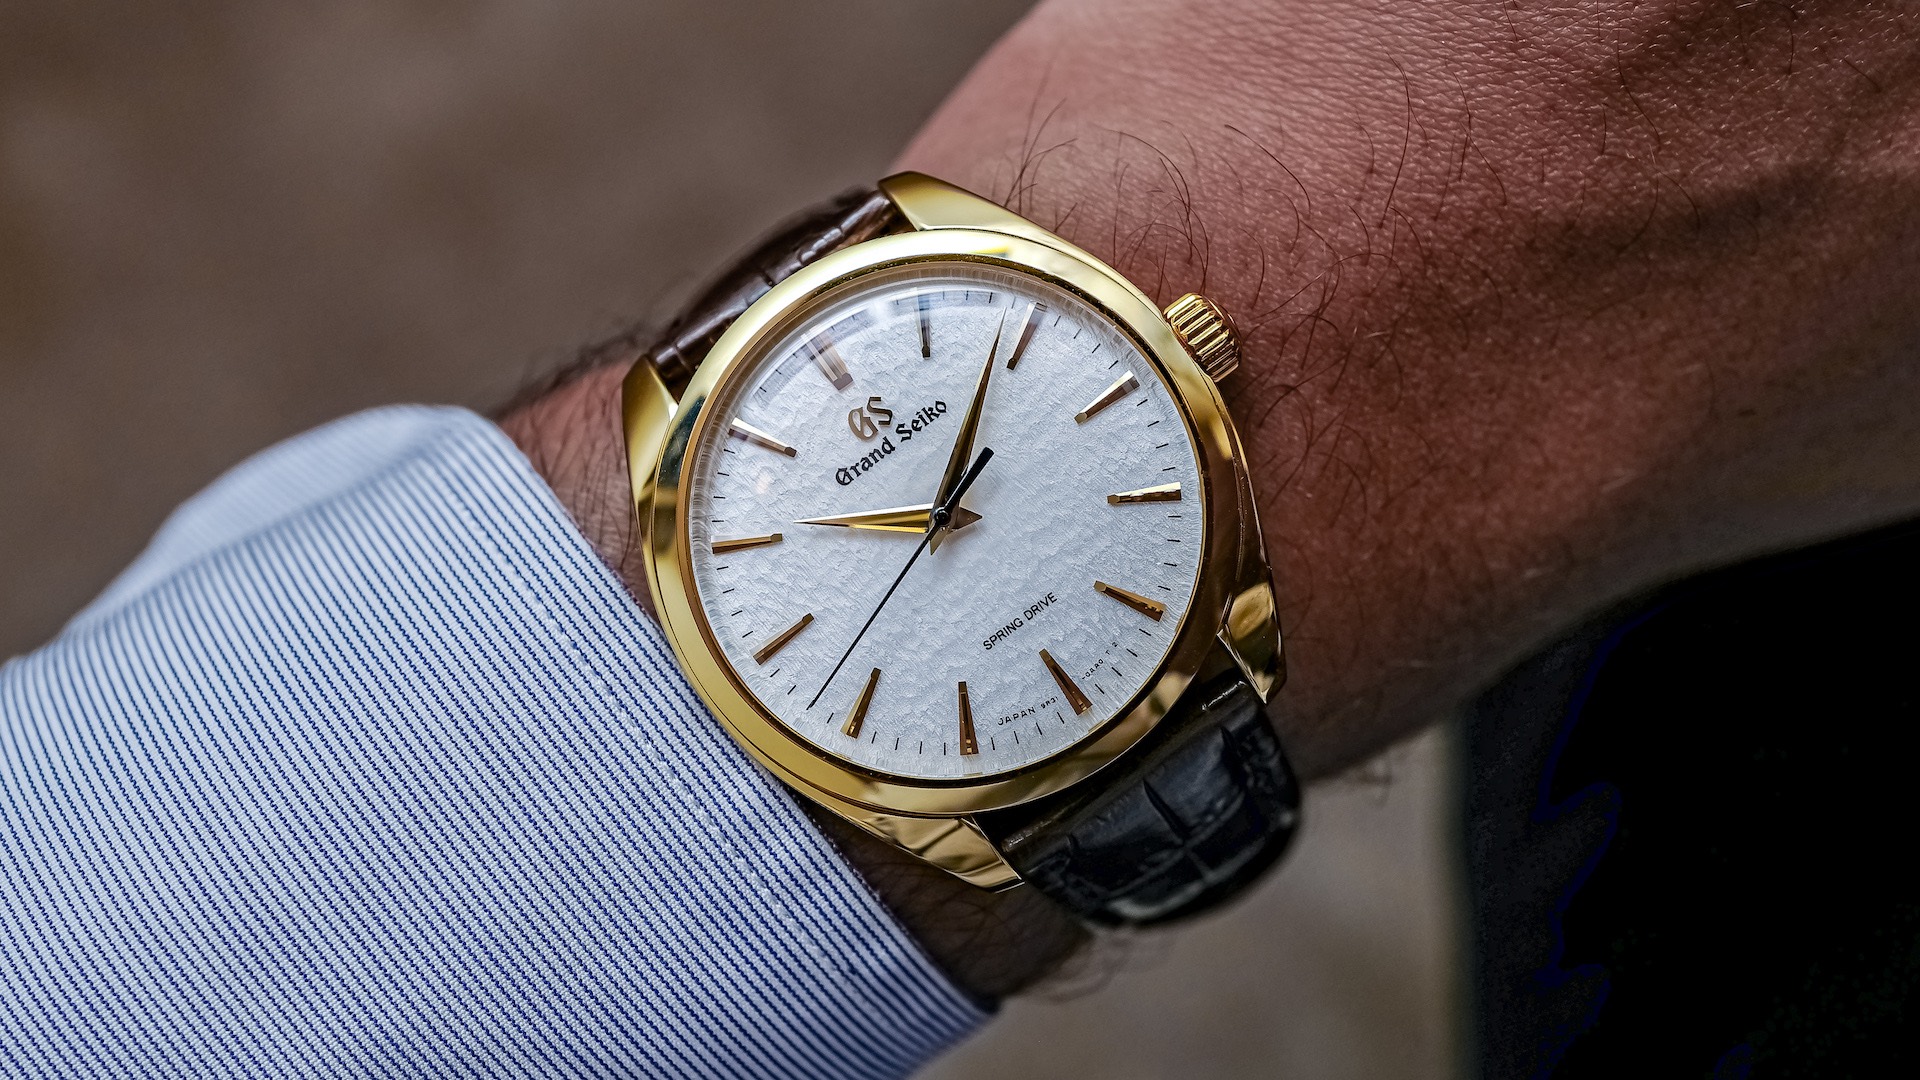 Grand Seiko: Looking at What Makes the Brand so Special – And